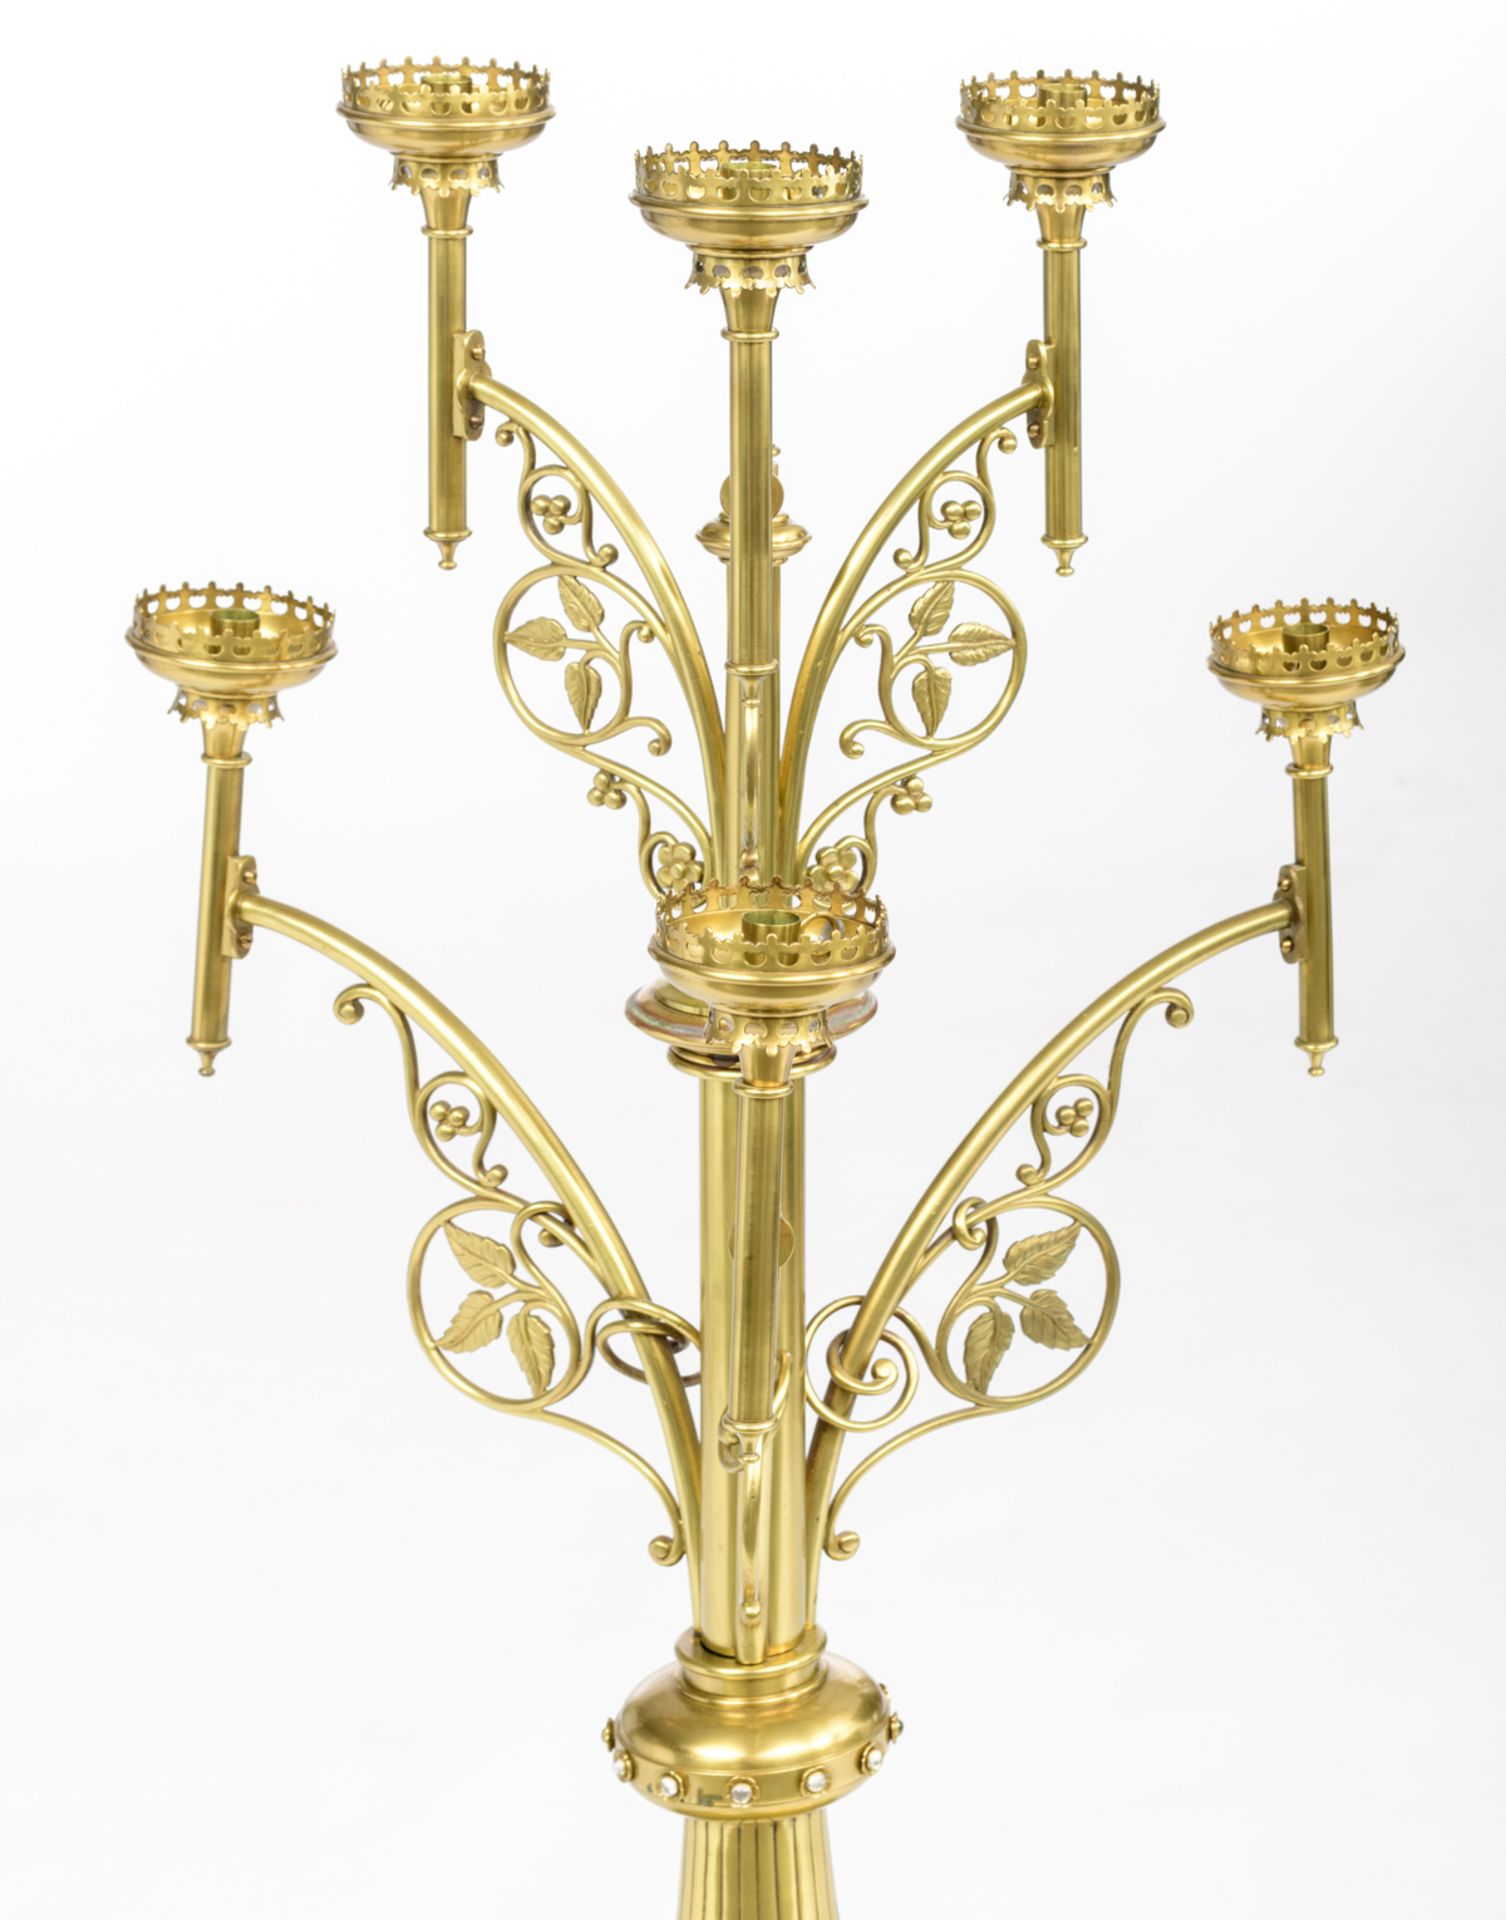 An imposing bronze Gothic Revival floor candelabra on lion-shaped feet, the six arms decorated with - Bild 5 aus 6